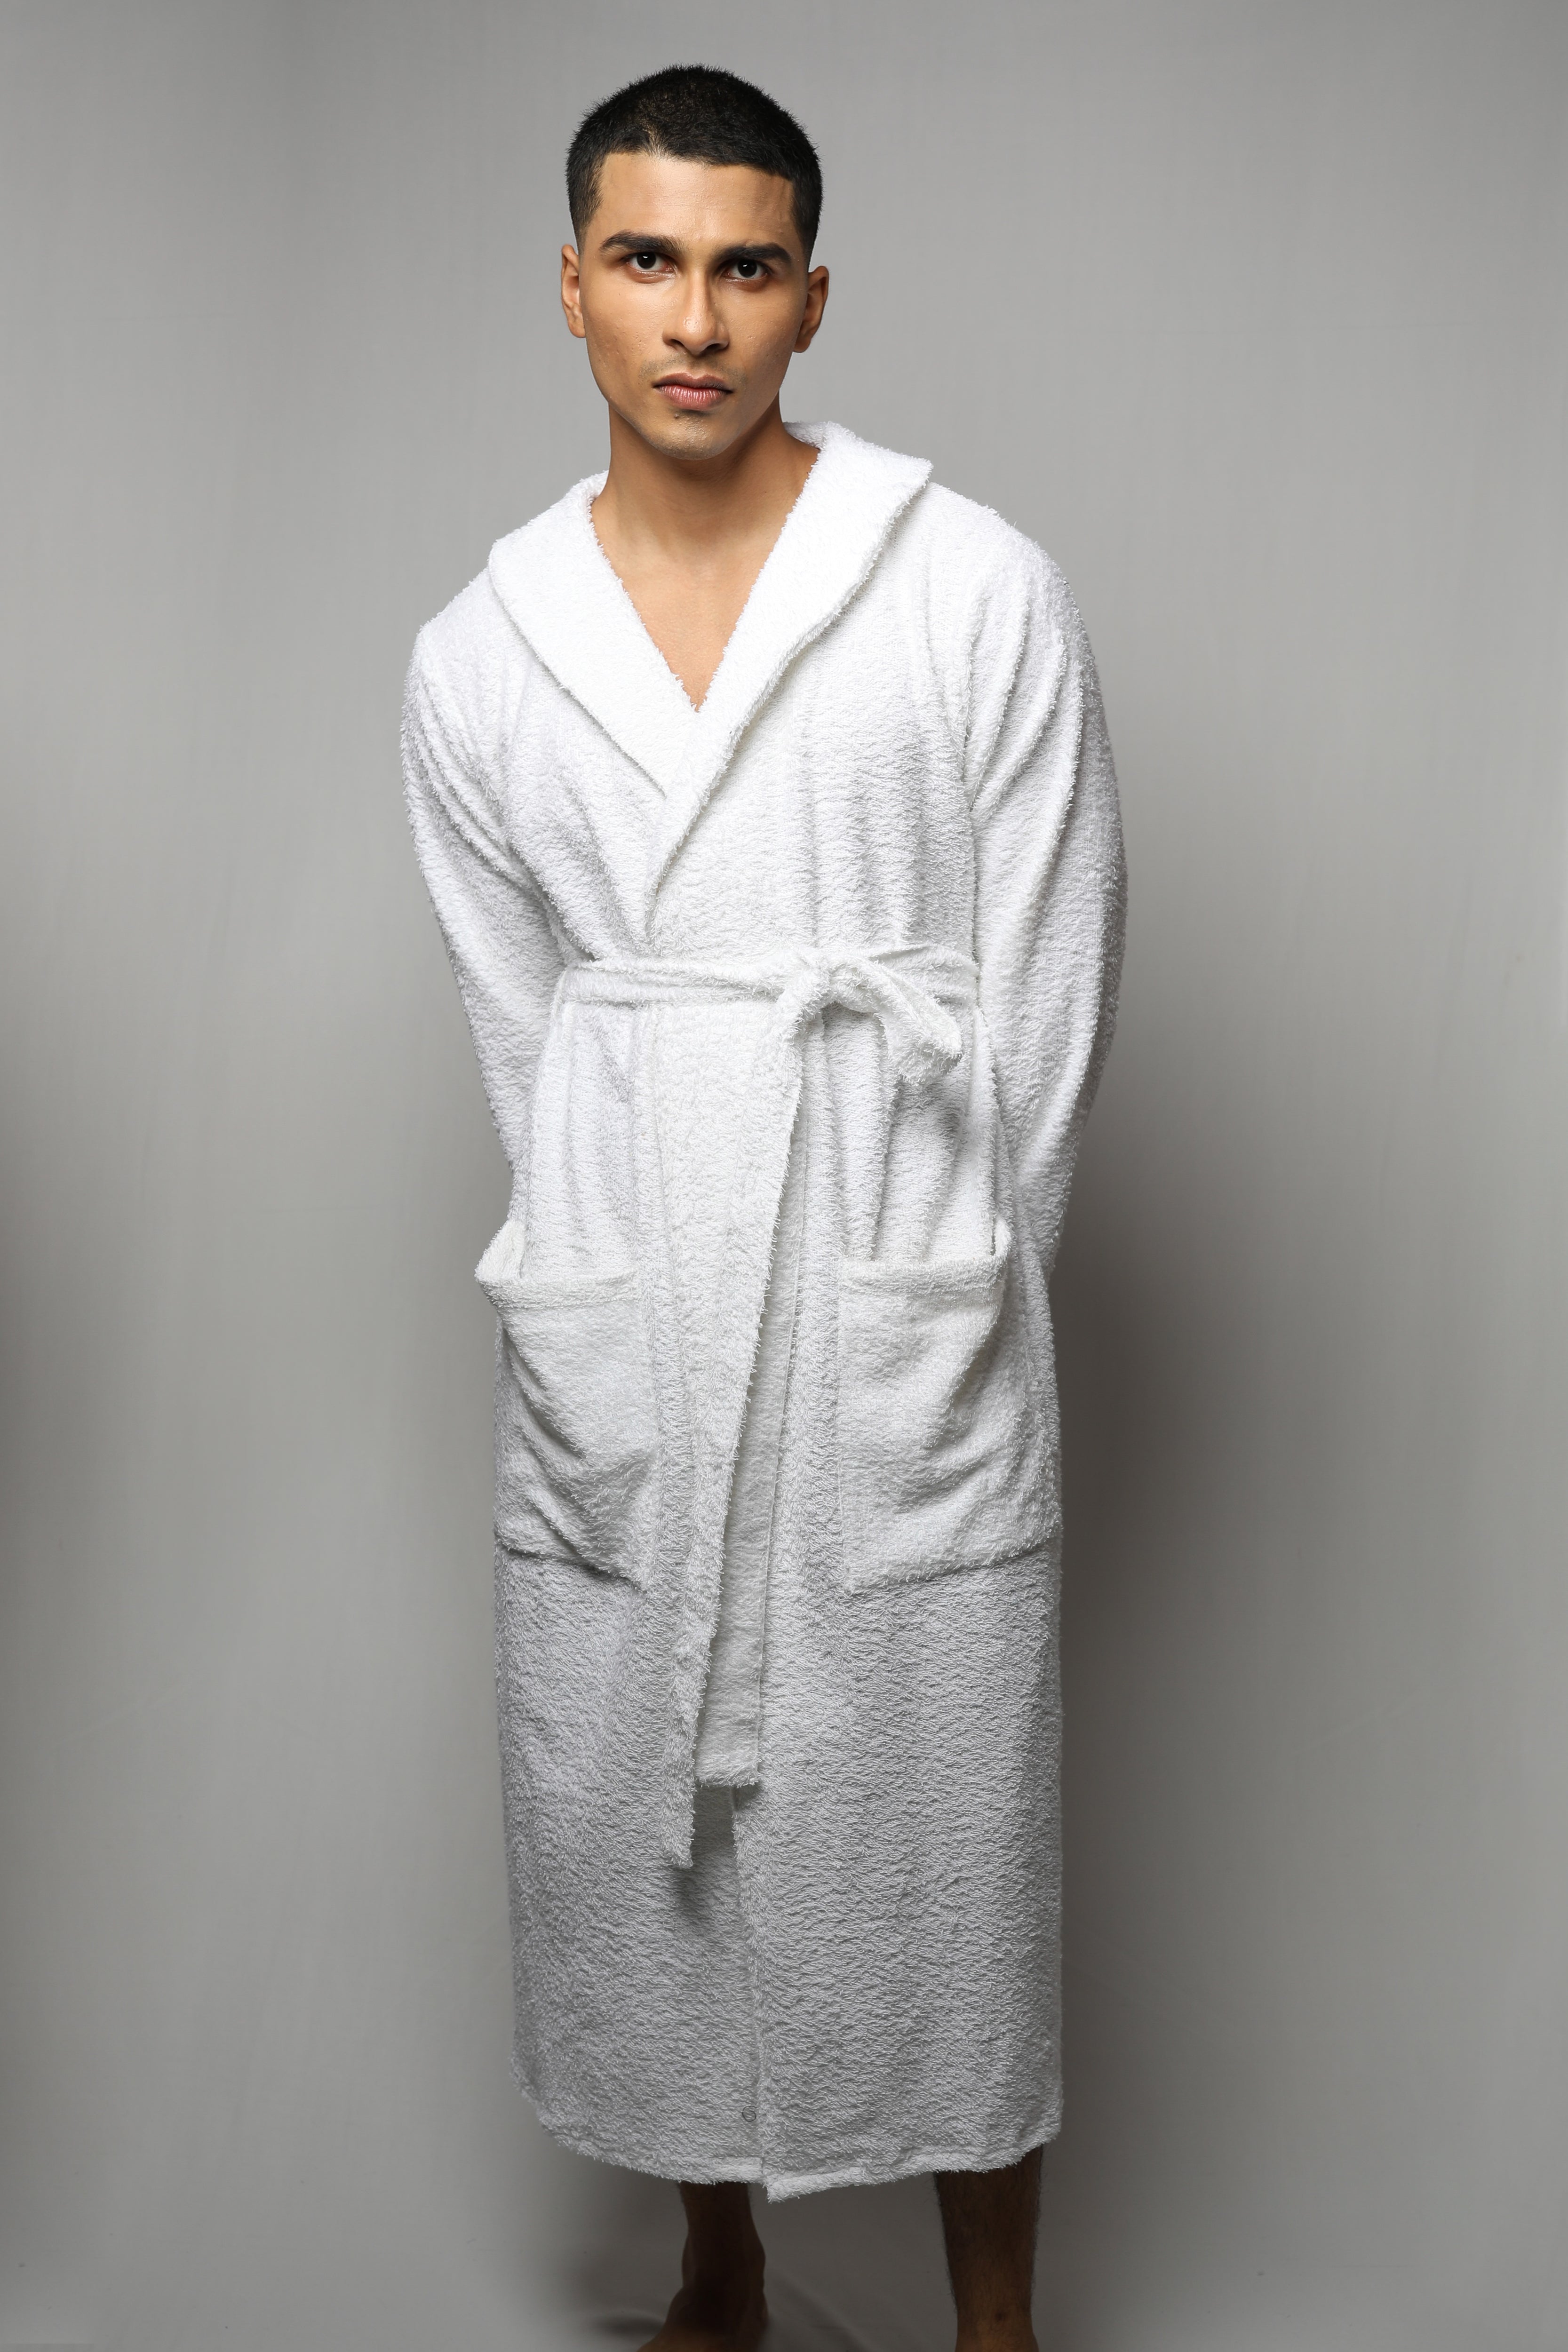 Buy Long Bath Robe for Womens Plush Soft Fleece Bathrobes Nightgown Ladies  Pajamas Sleepwear Housecoat, Navy Blue, Small-Medium Online at Low Prices  in India - Amazon.in